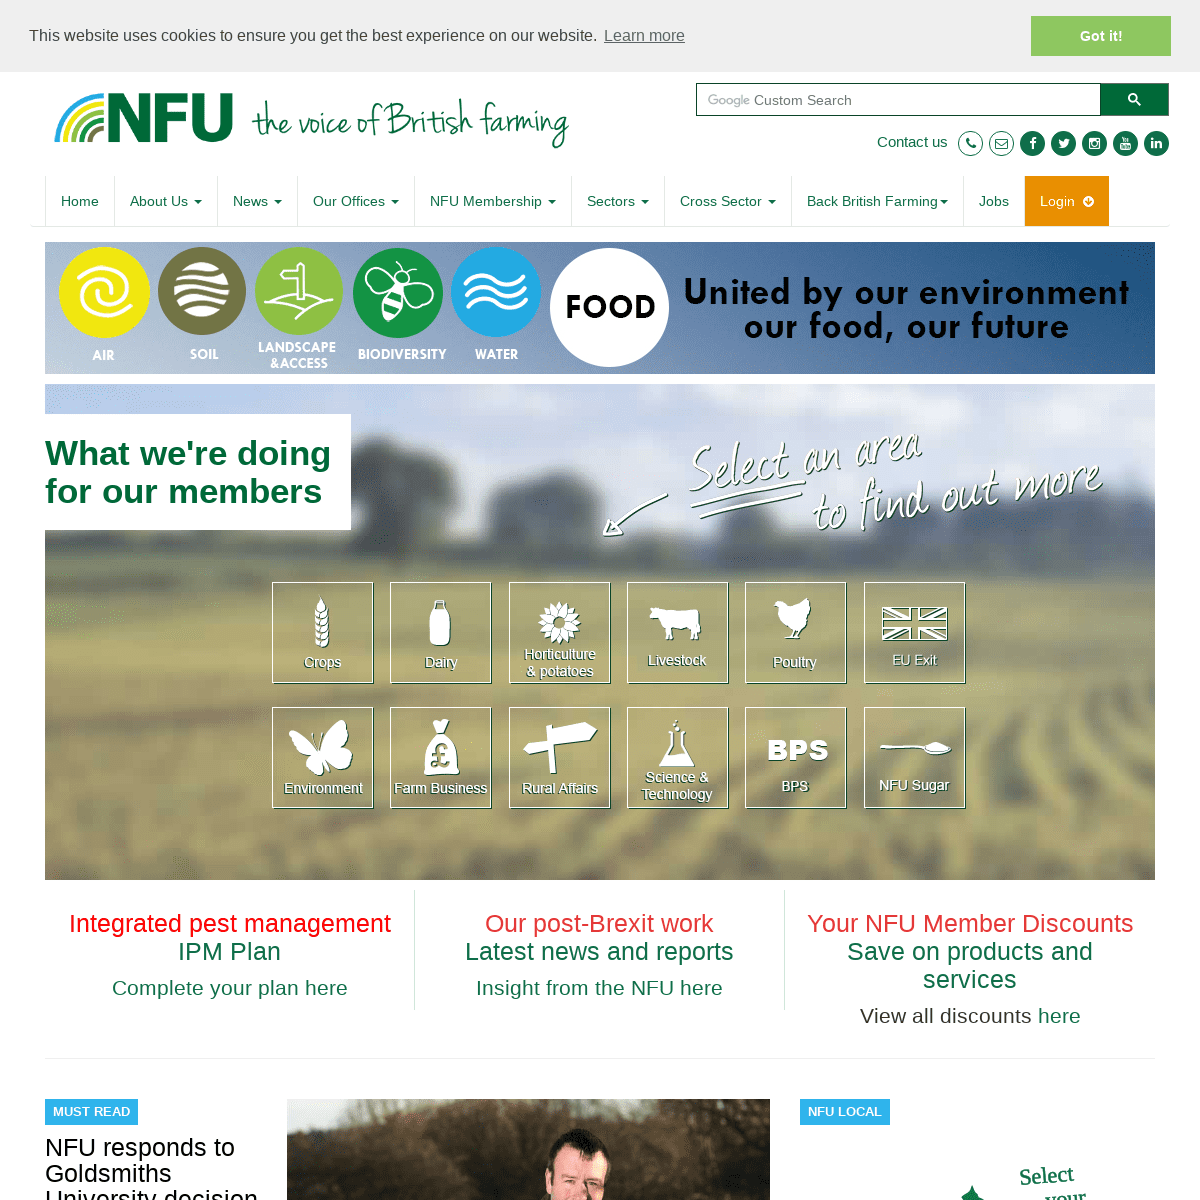 A complete backup of nfuonline.com